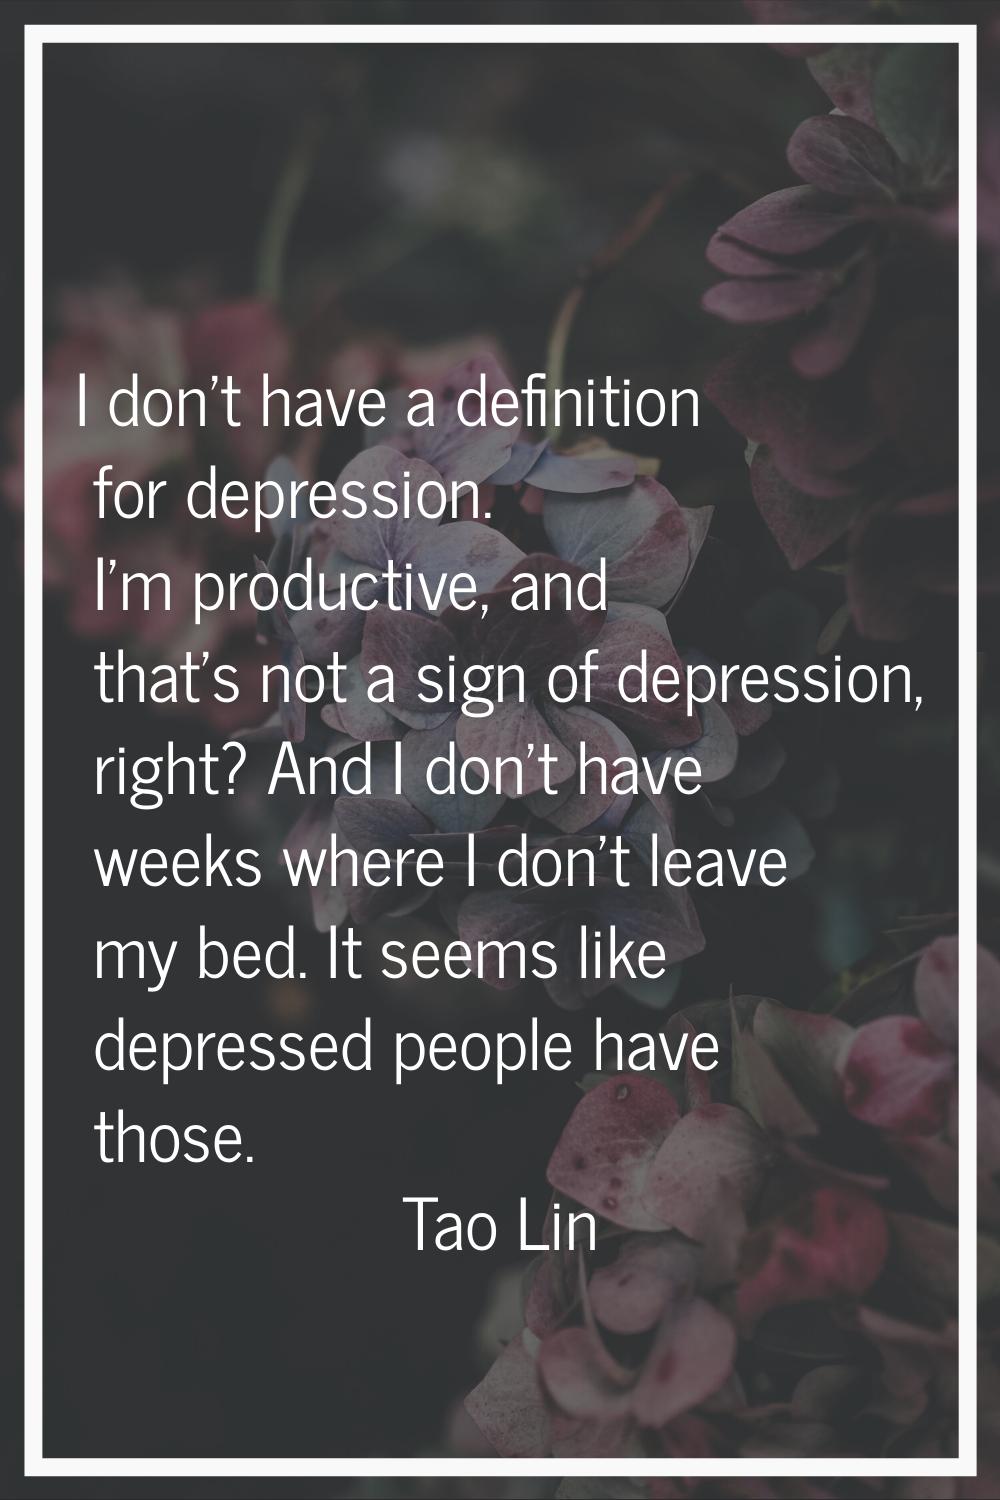 I don't have a definition for depression. I'm productive, and that's not a sign of depression, righ